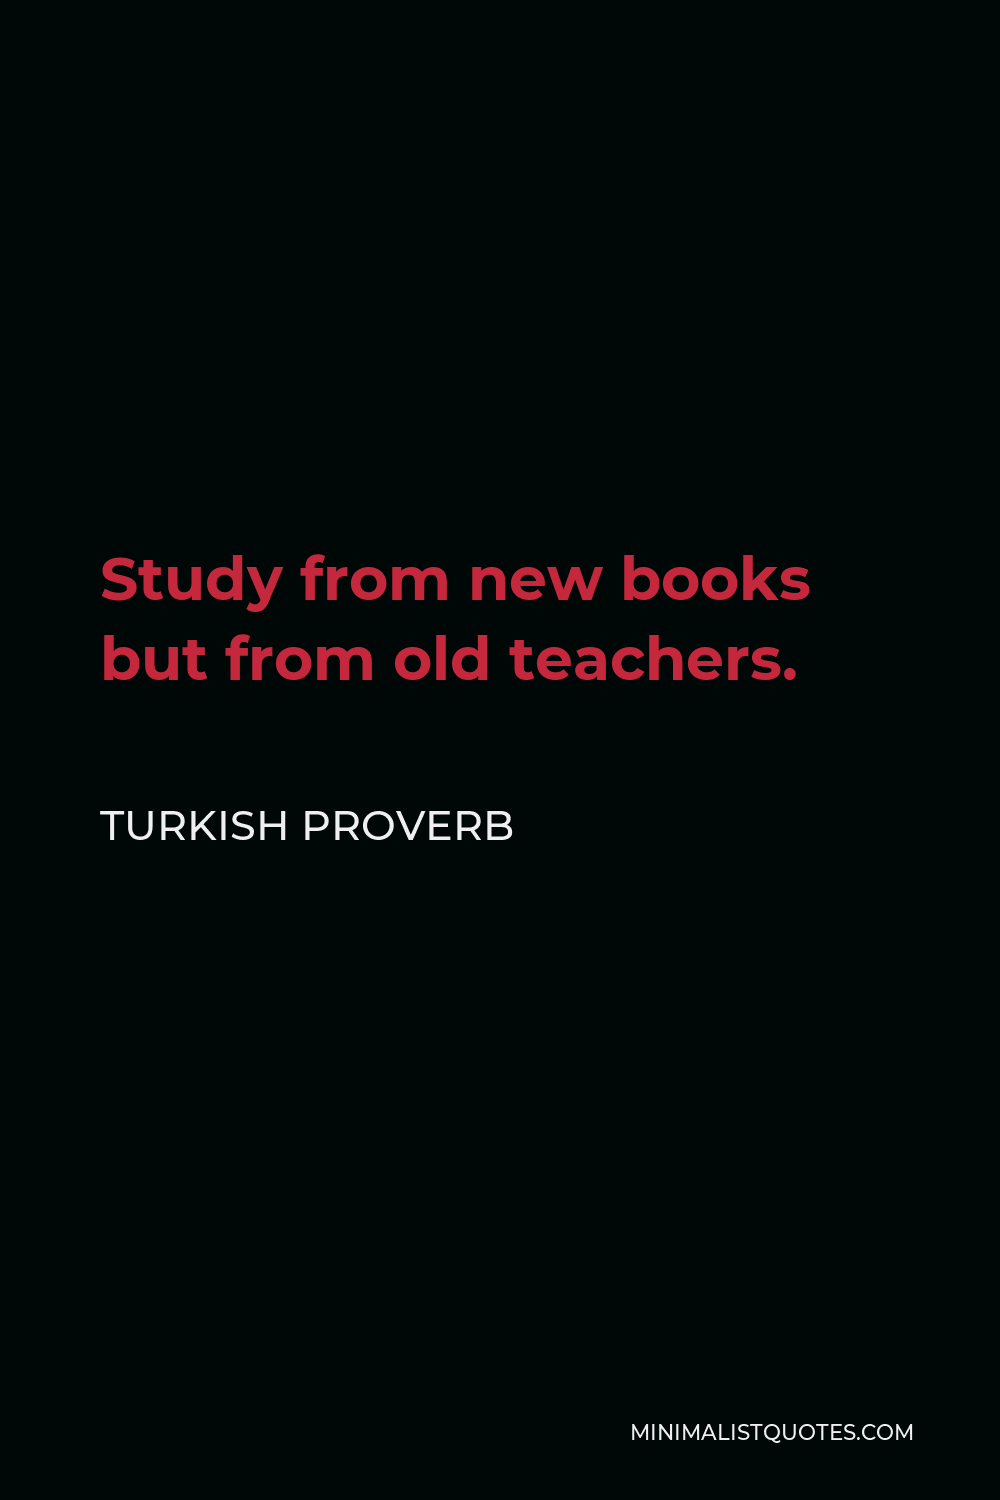 Turkish Proverb Quote - Study from new books but from old teachers.